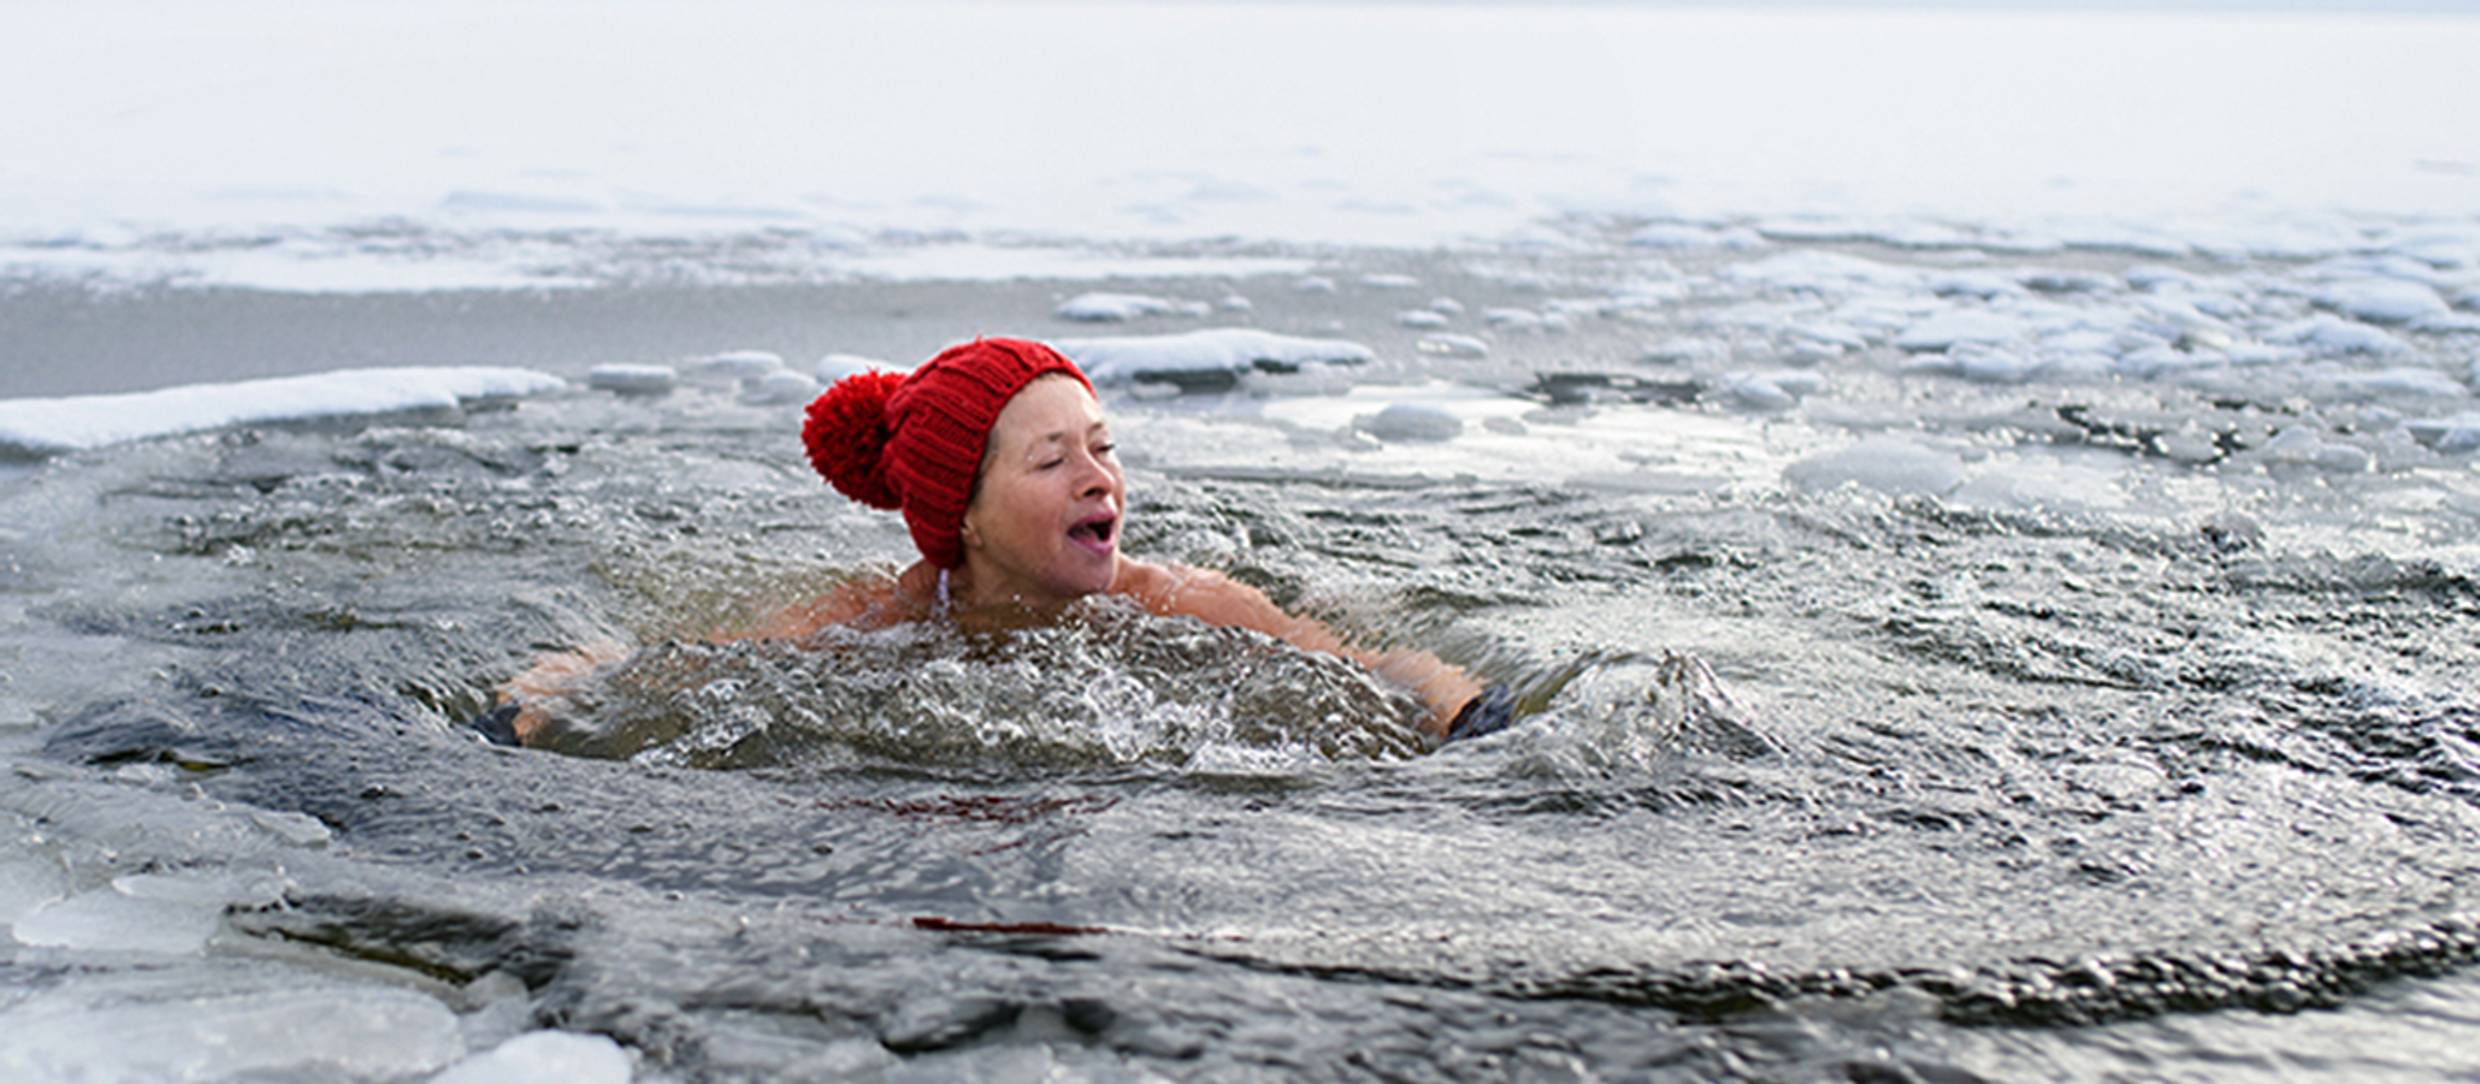 A woman swims in an icy lake to demonstrate the benefits of cold therapy